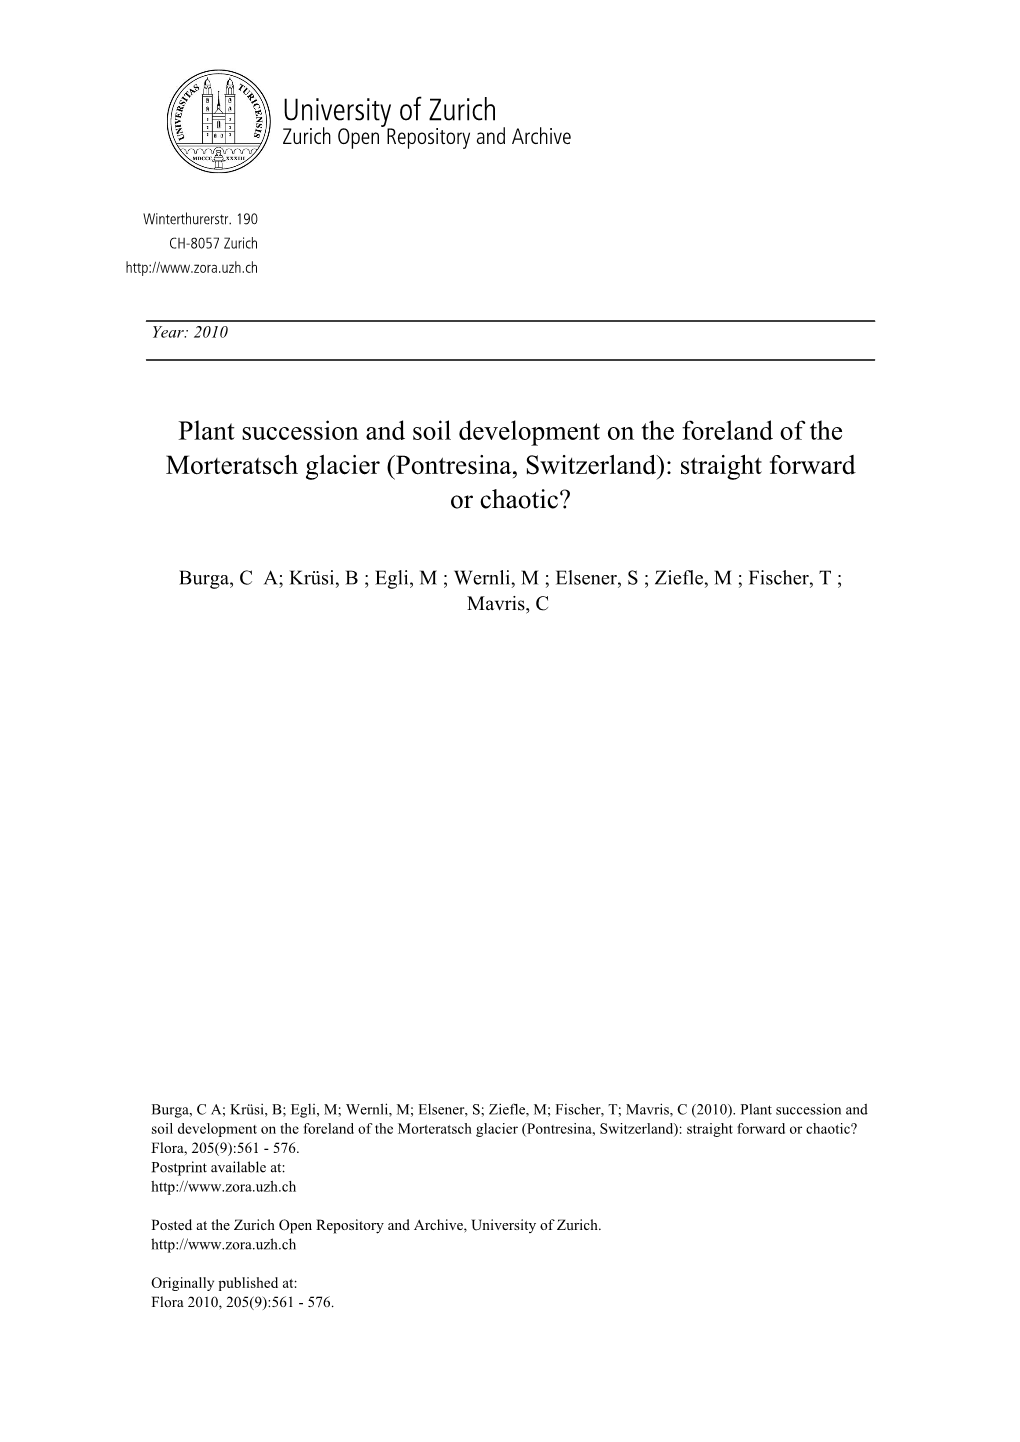 Plant Succession and Soil Development on the Foreland of the Morteratsch Glacier (Pontresina, Switzerland): Straight Forward Or Chaotic? Flora, 205(9):561 - 576